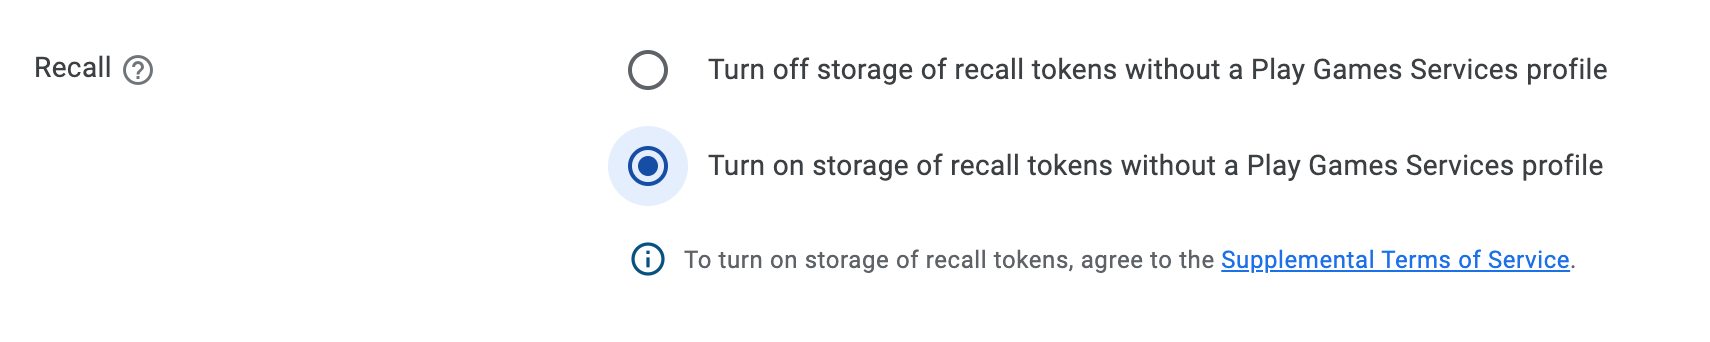 Select the option labeled "Turn on
storage".